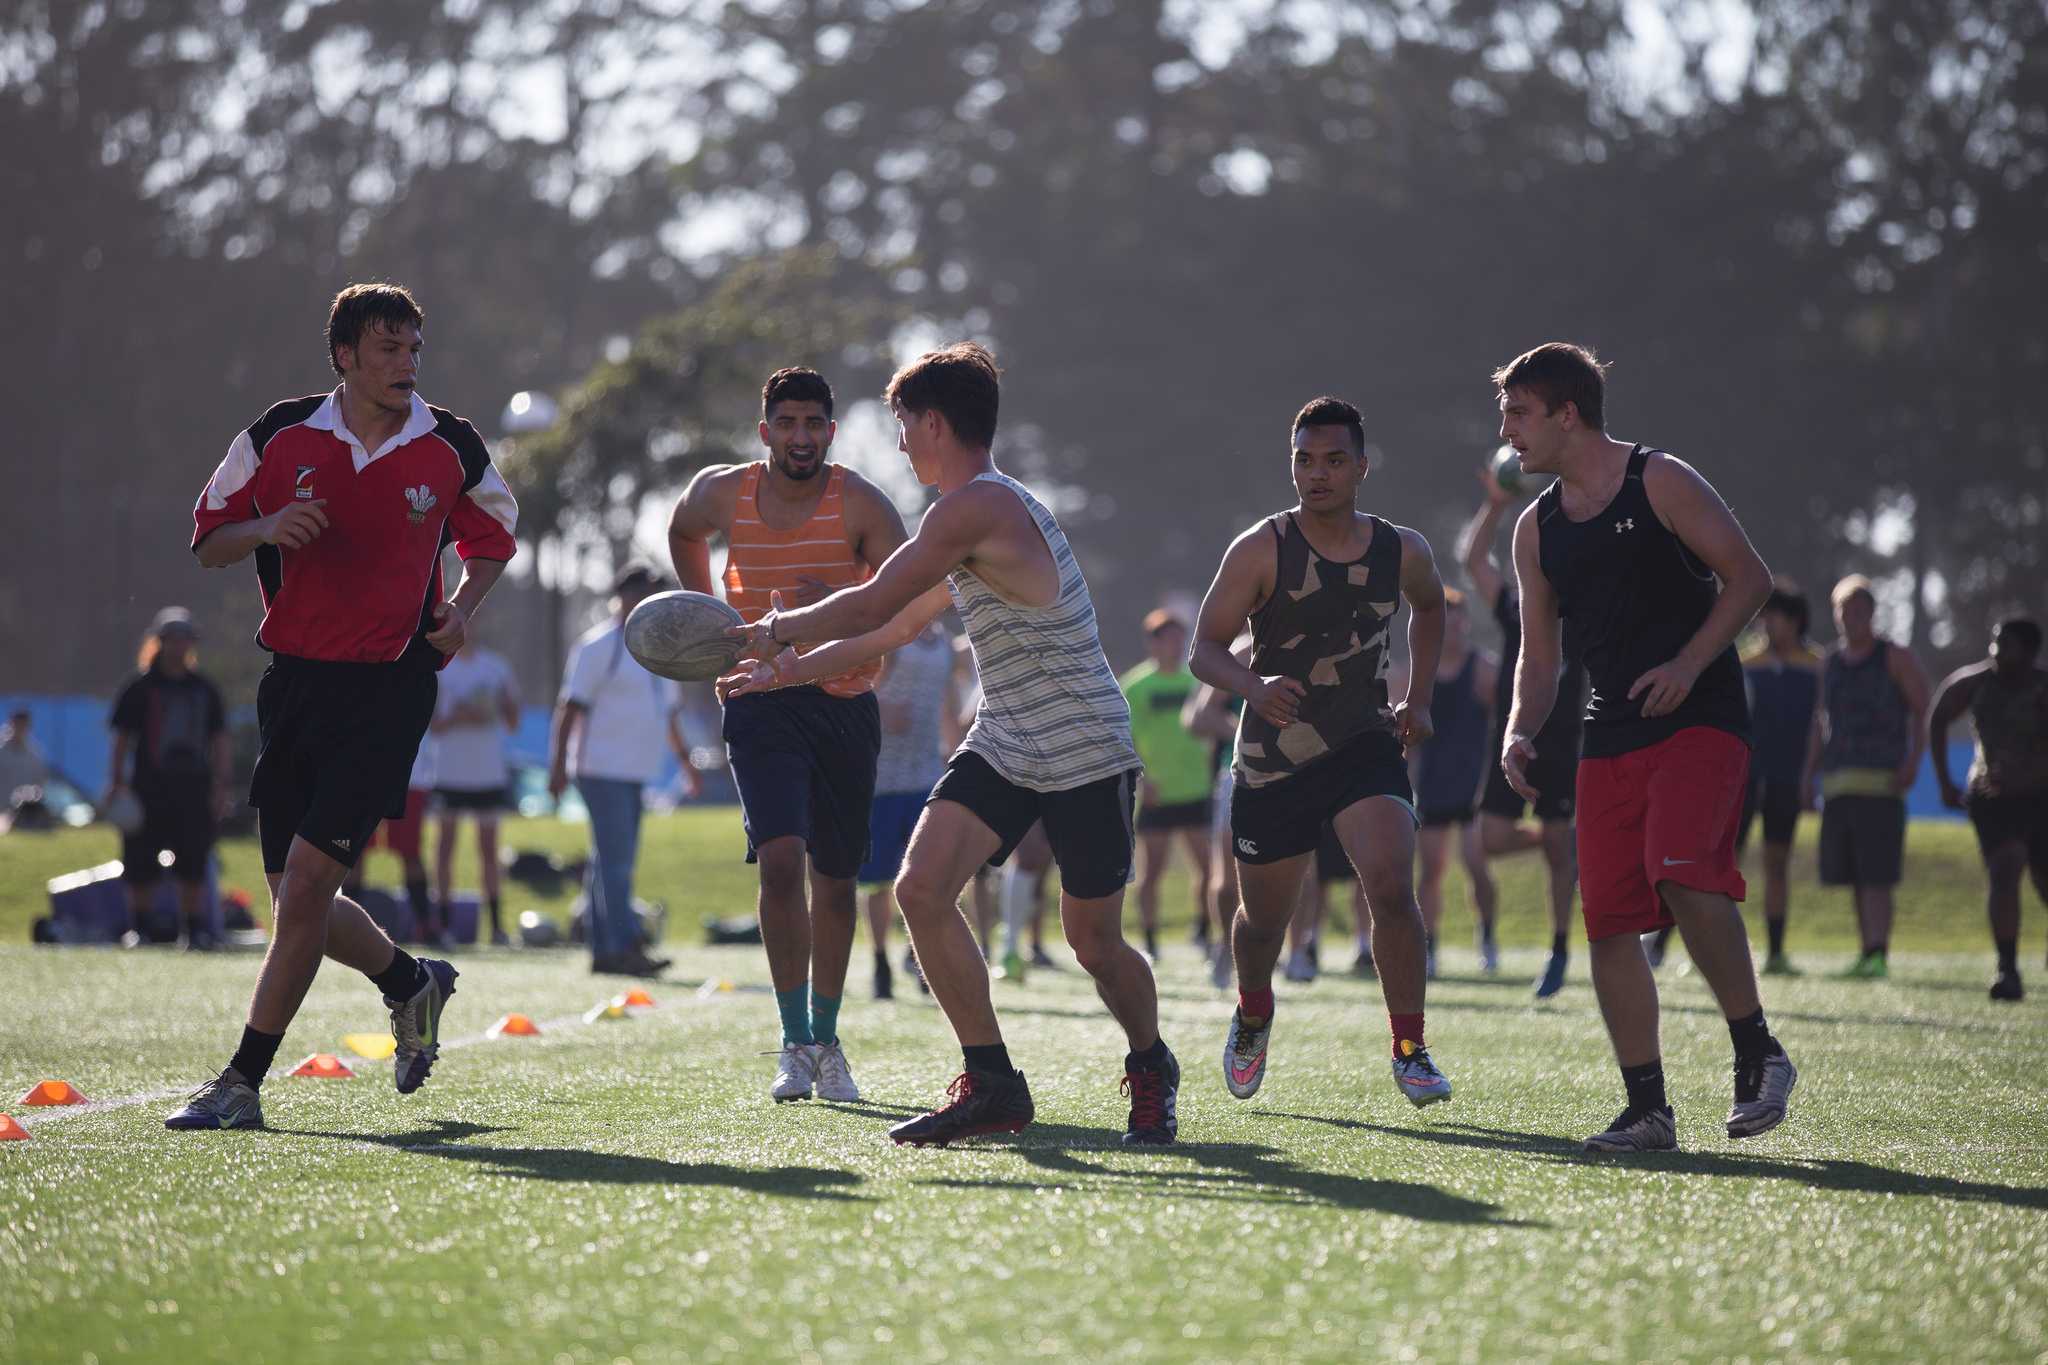 Members of the SF State Rugby Team run passing drills during practice on the West Campus Green, Friday, Sept. 18, 2015. (Brian Churchwell / Xpress)